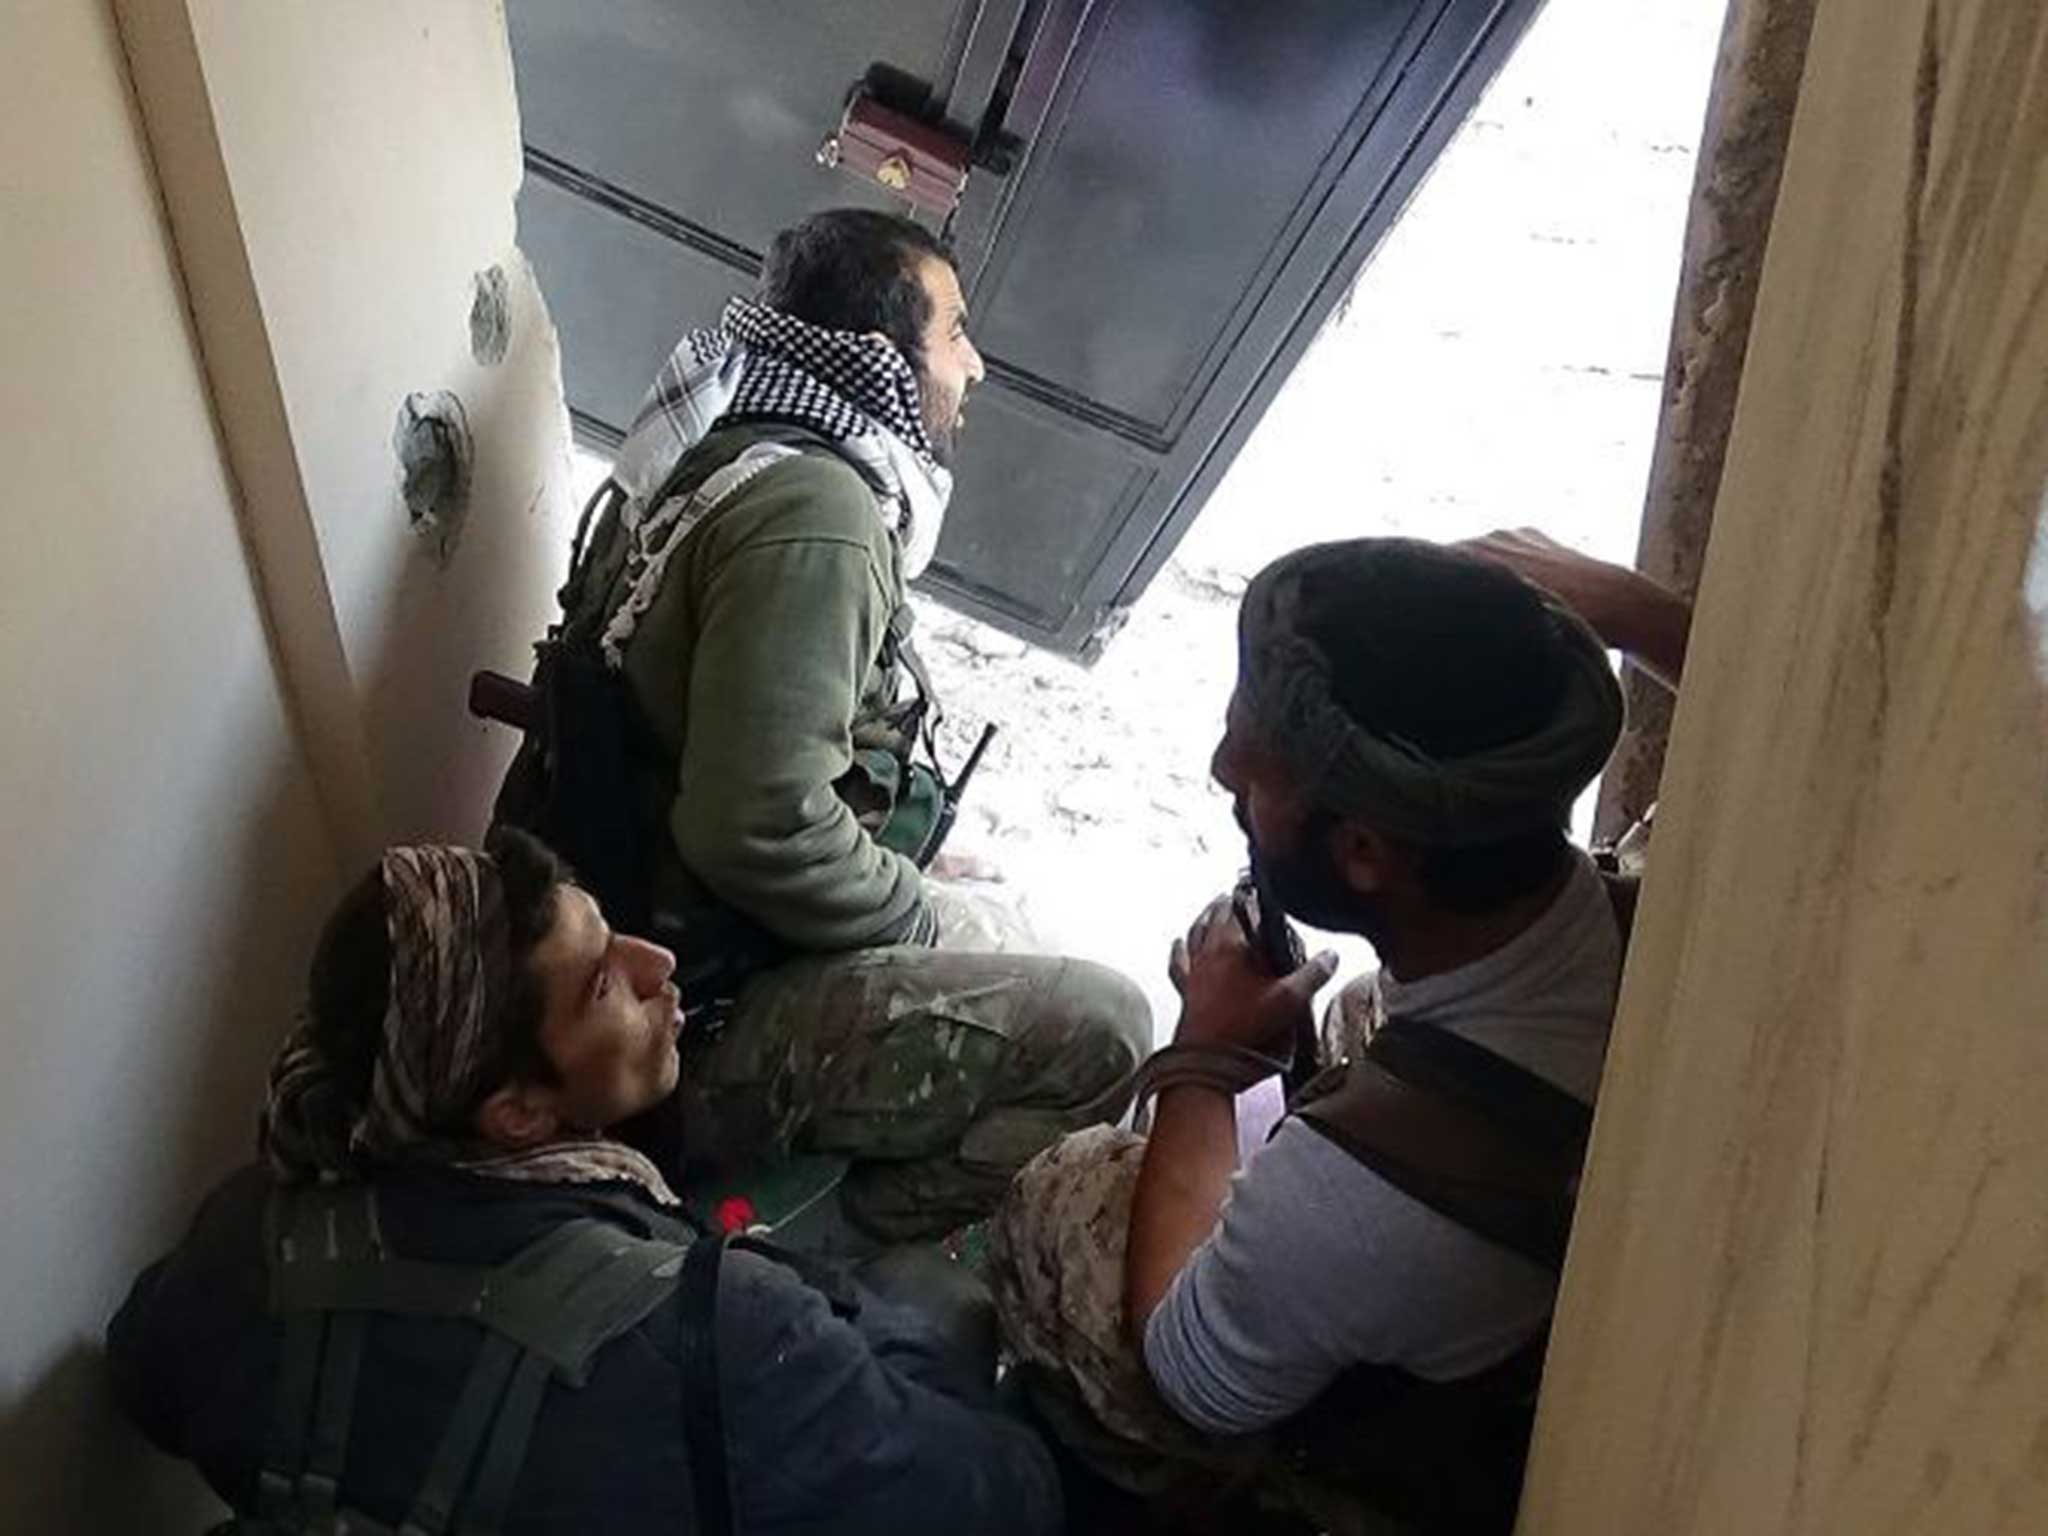 Fighters from the Free Syria Army (FSA) are joining Isis as US bombing pressure mounts